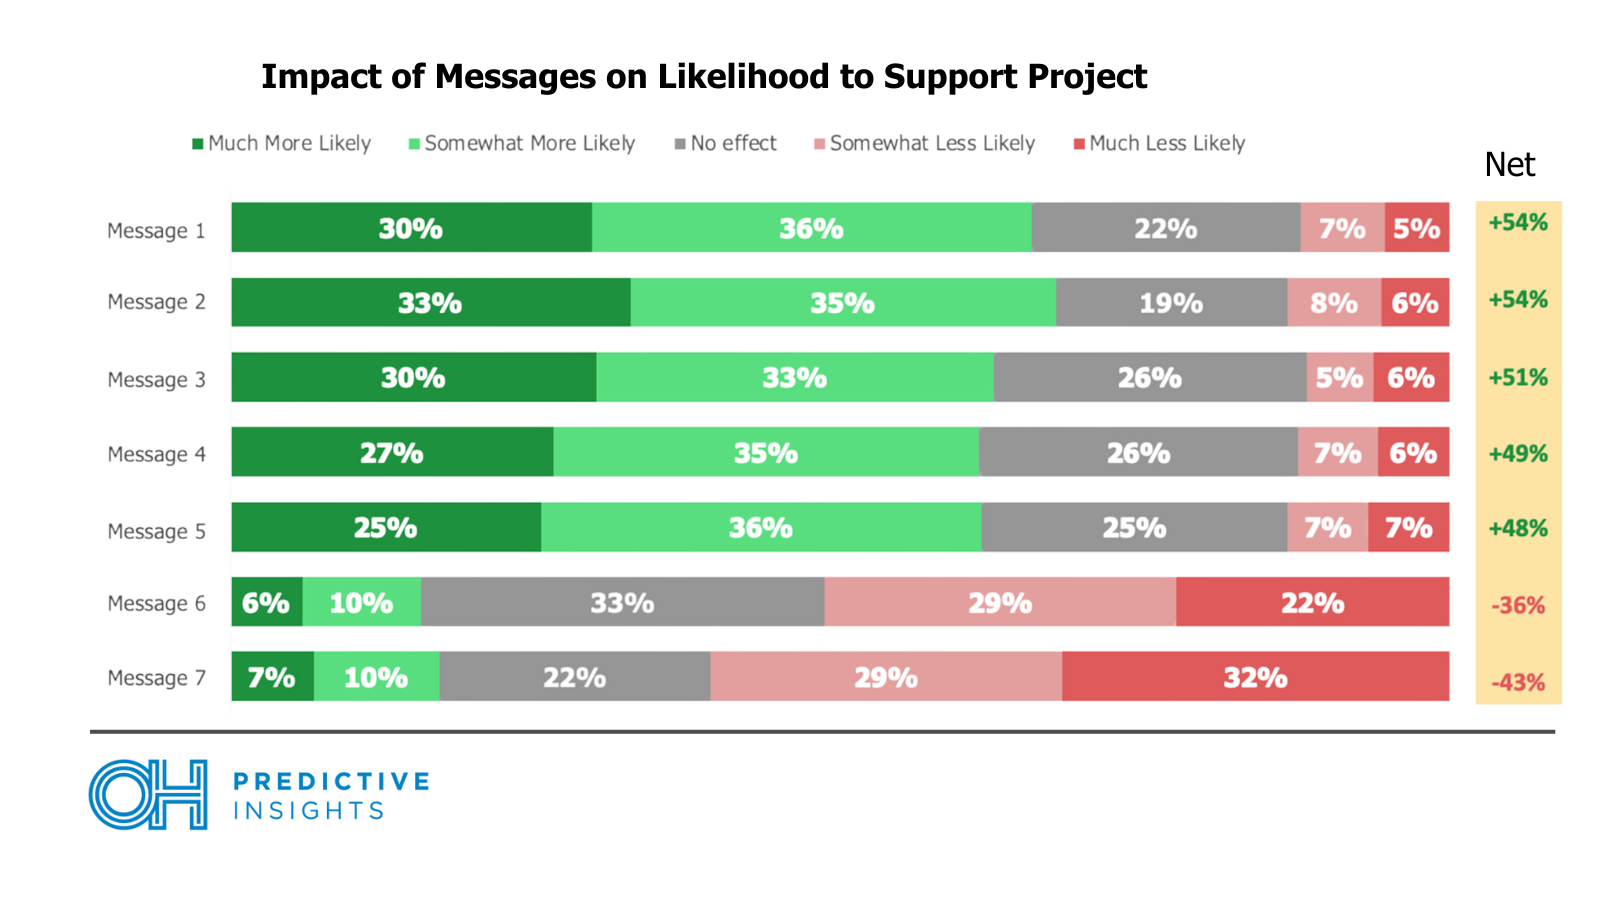 Impact of Messages on Likelihood to Support Project